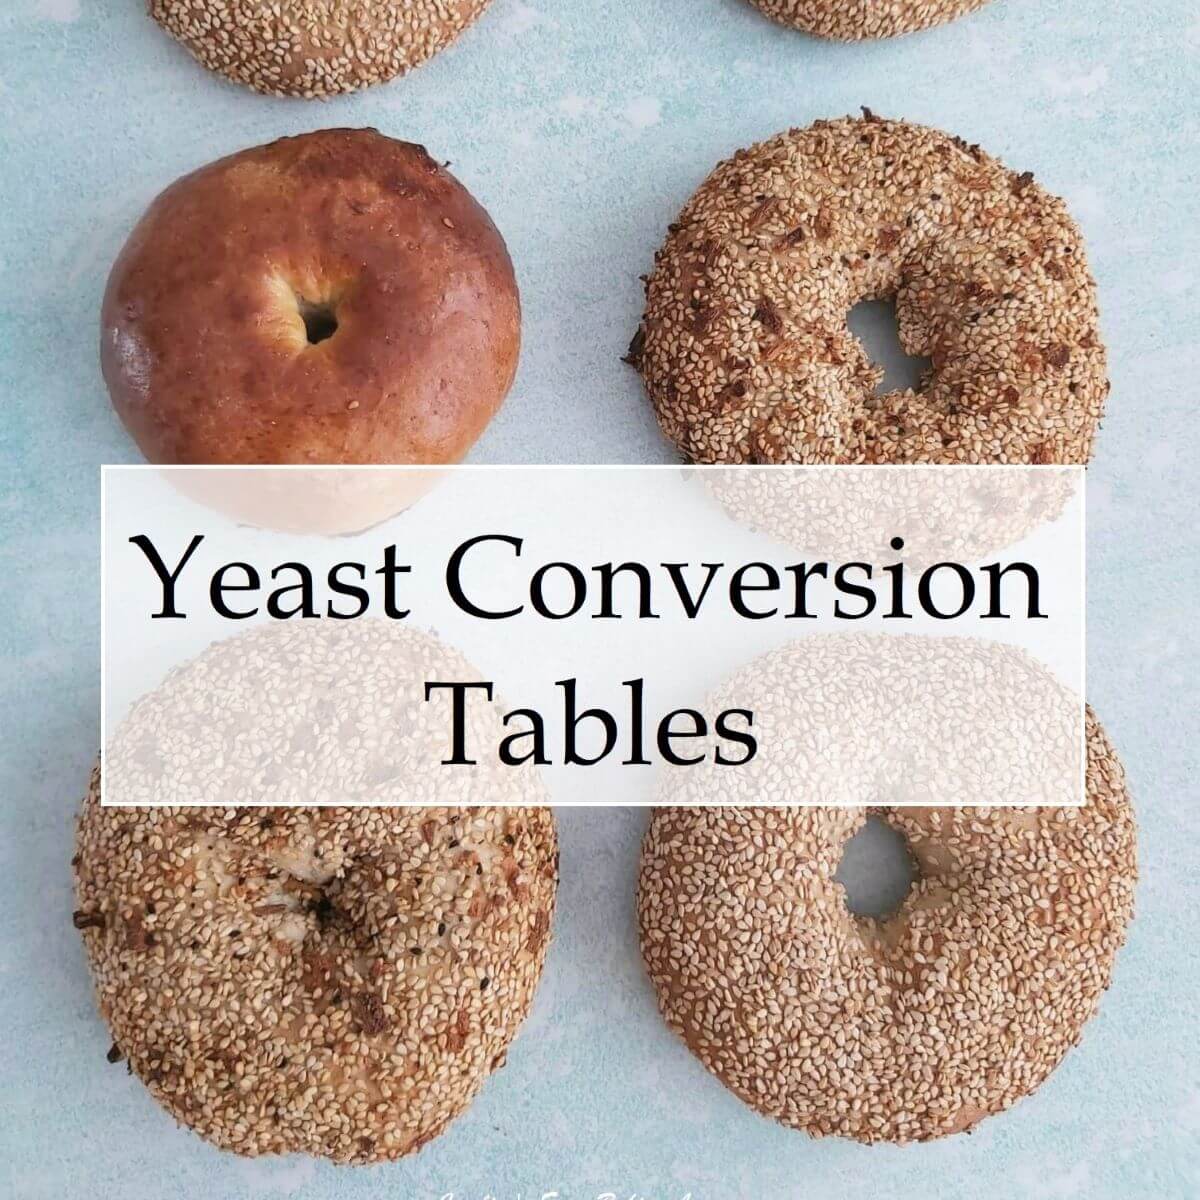 Yeast Conversion Tables